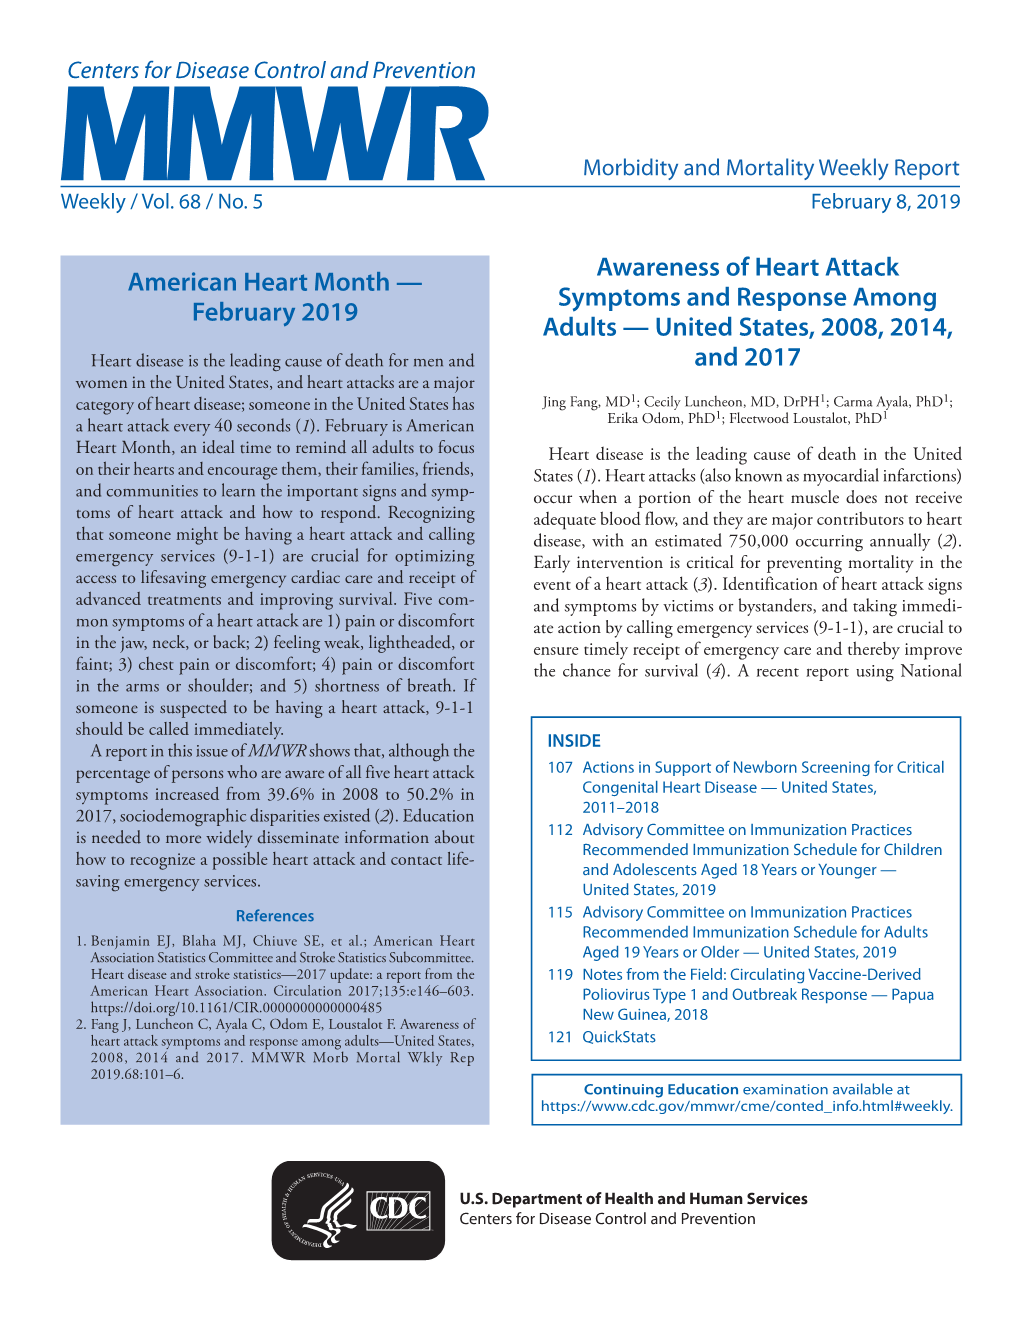 Morbidity and Mortality Weekly Report, Volume 68, Issue Number 5